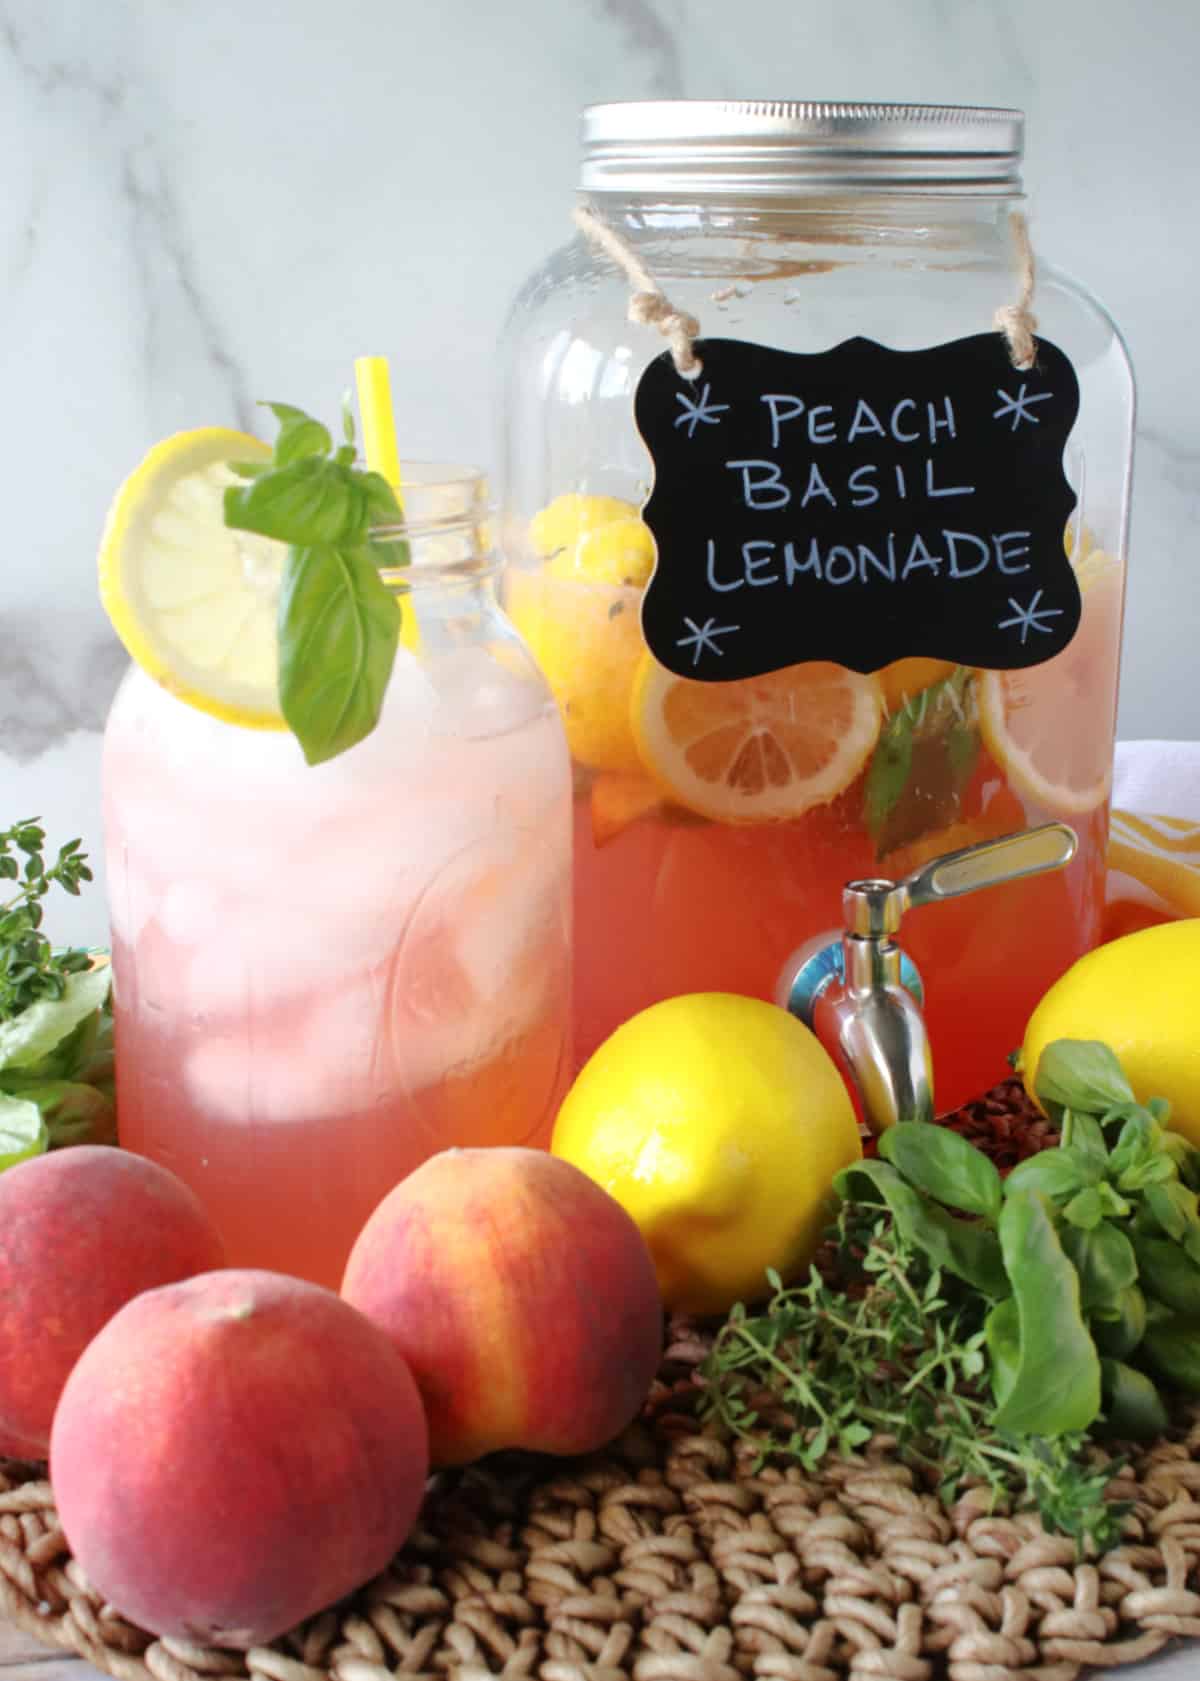 A glass pitcher with a spigot along with a glass with a straw of Peach Basil Lemonade.